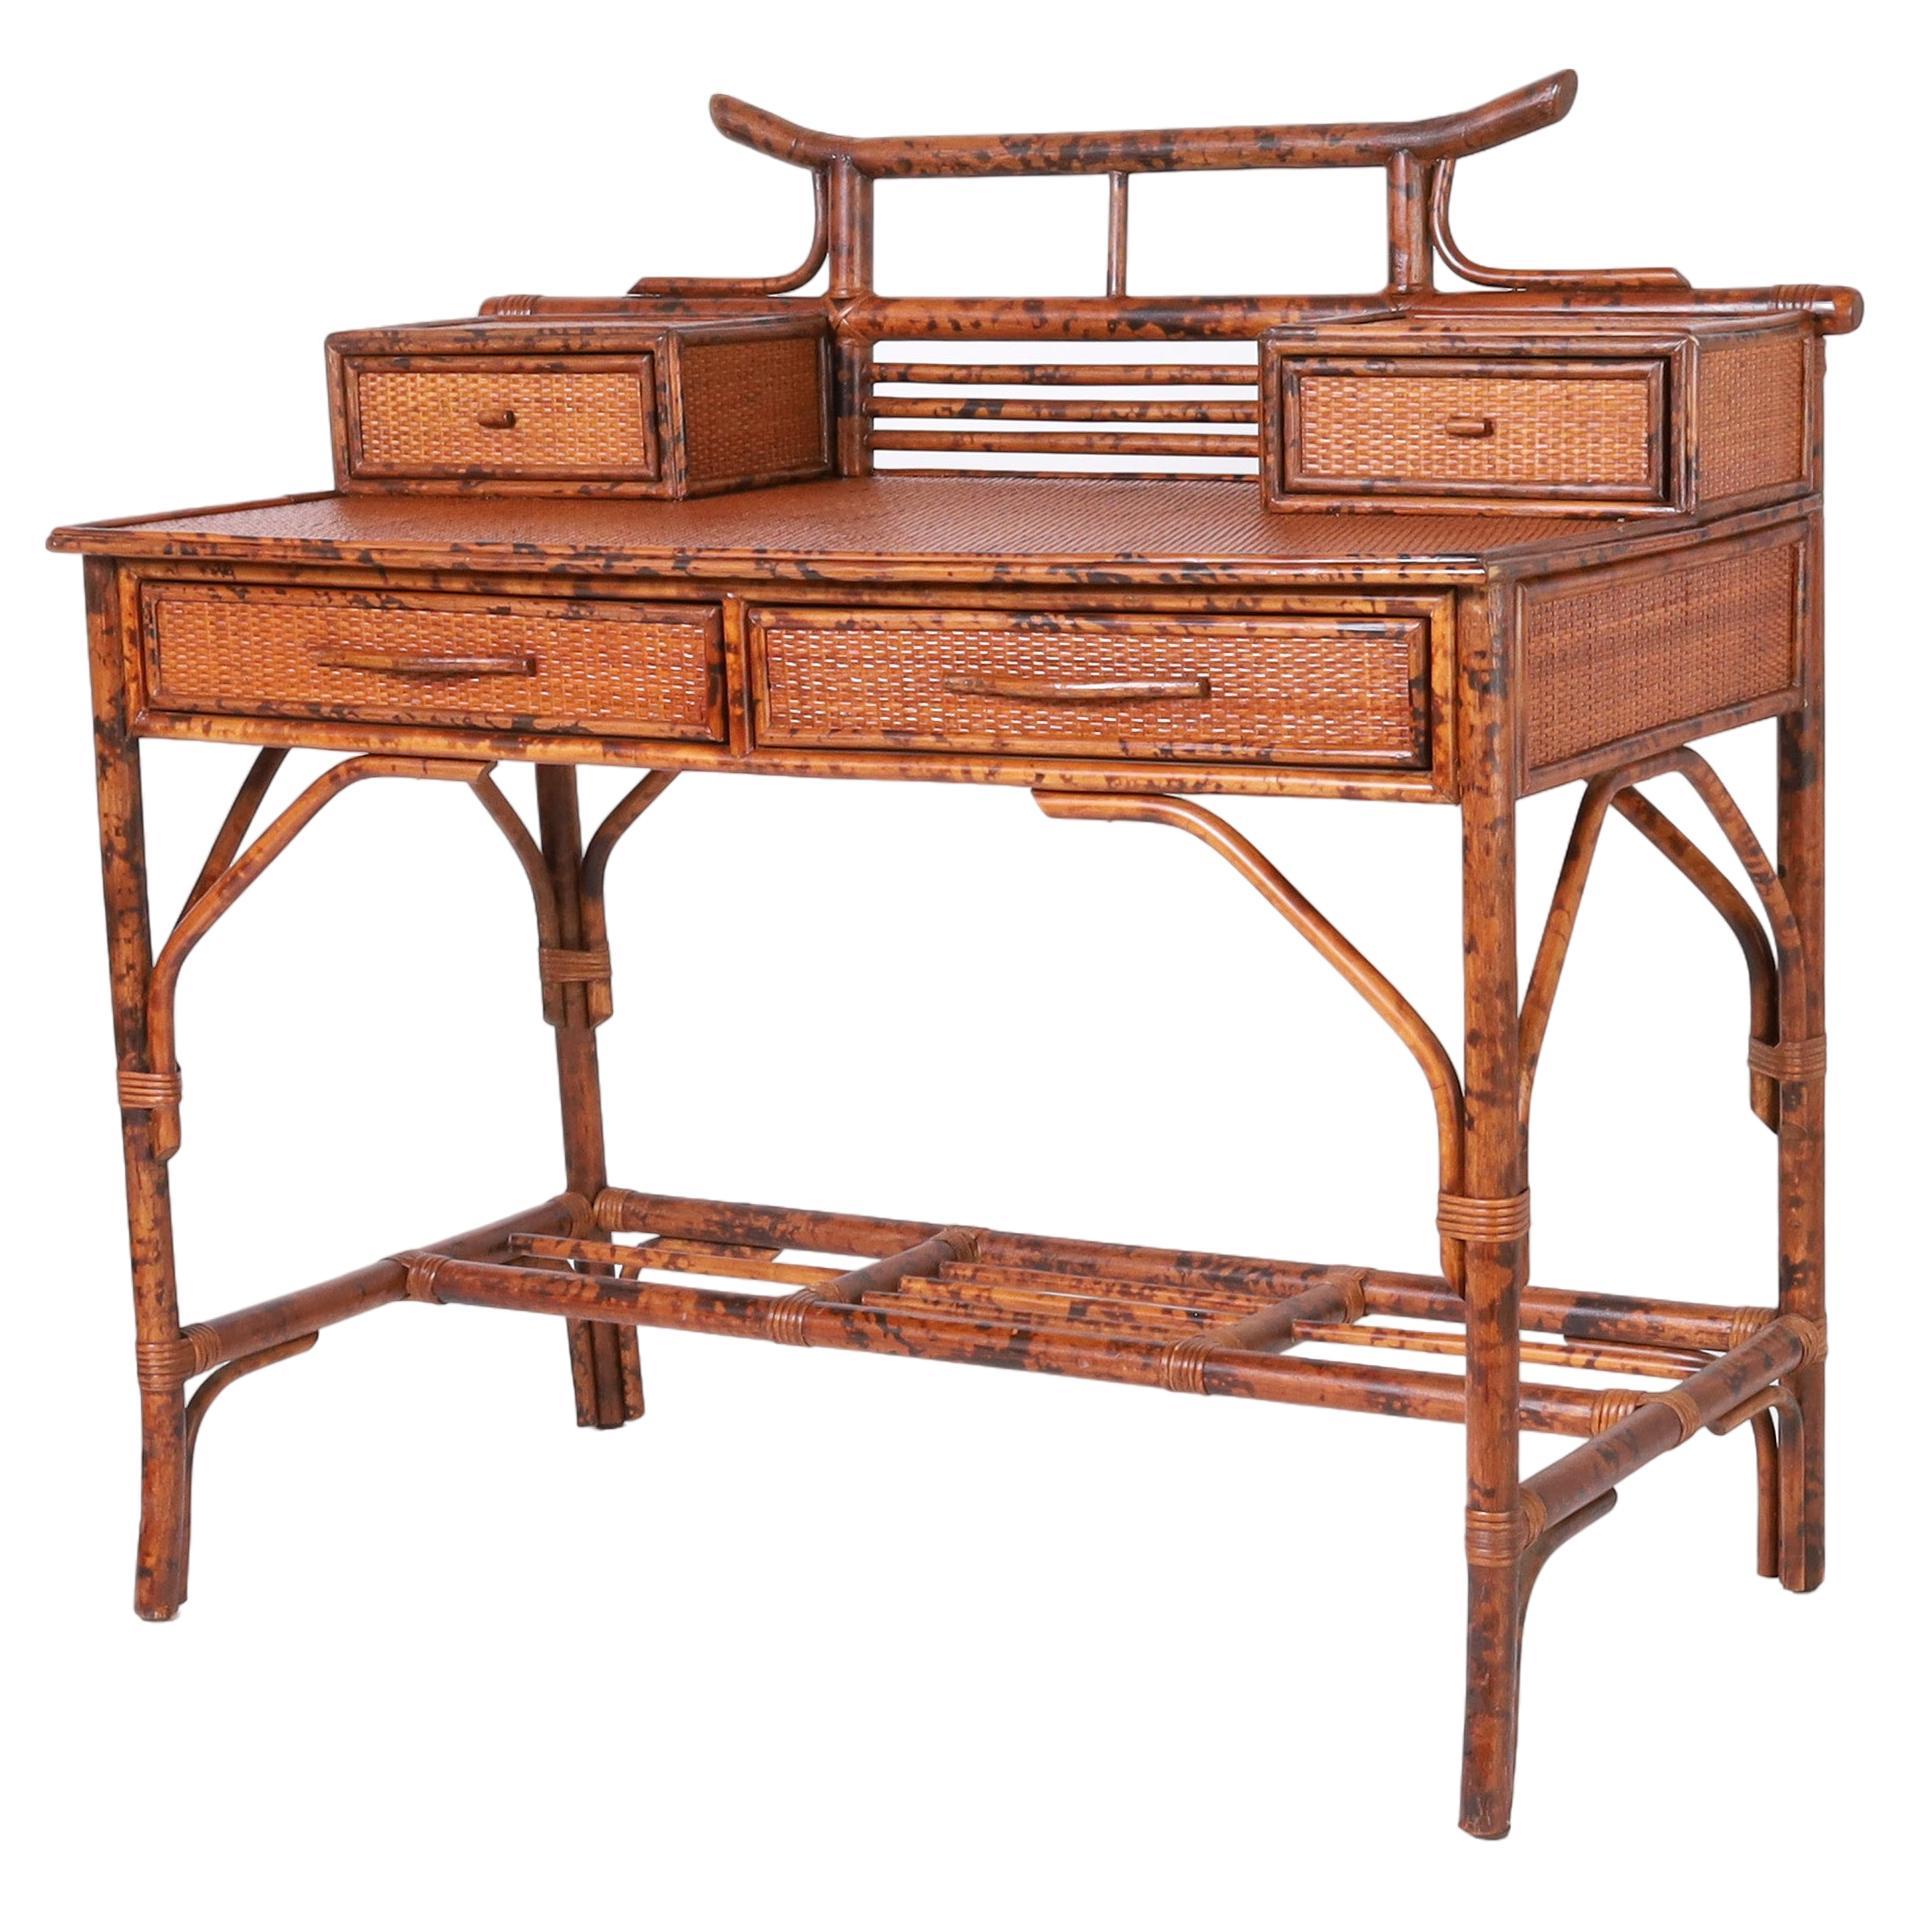 British Colonial Style Faux Bamboo and Grasscloth Pagoda Desk